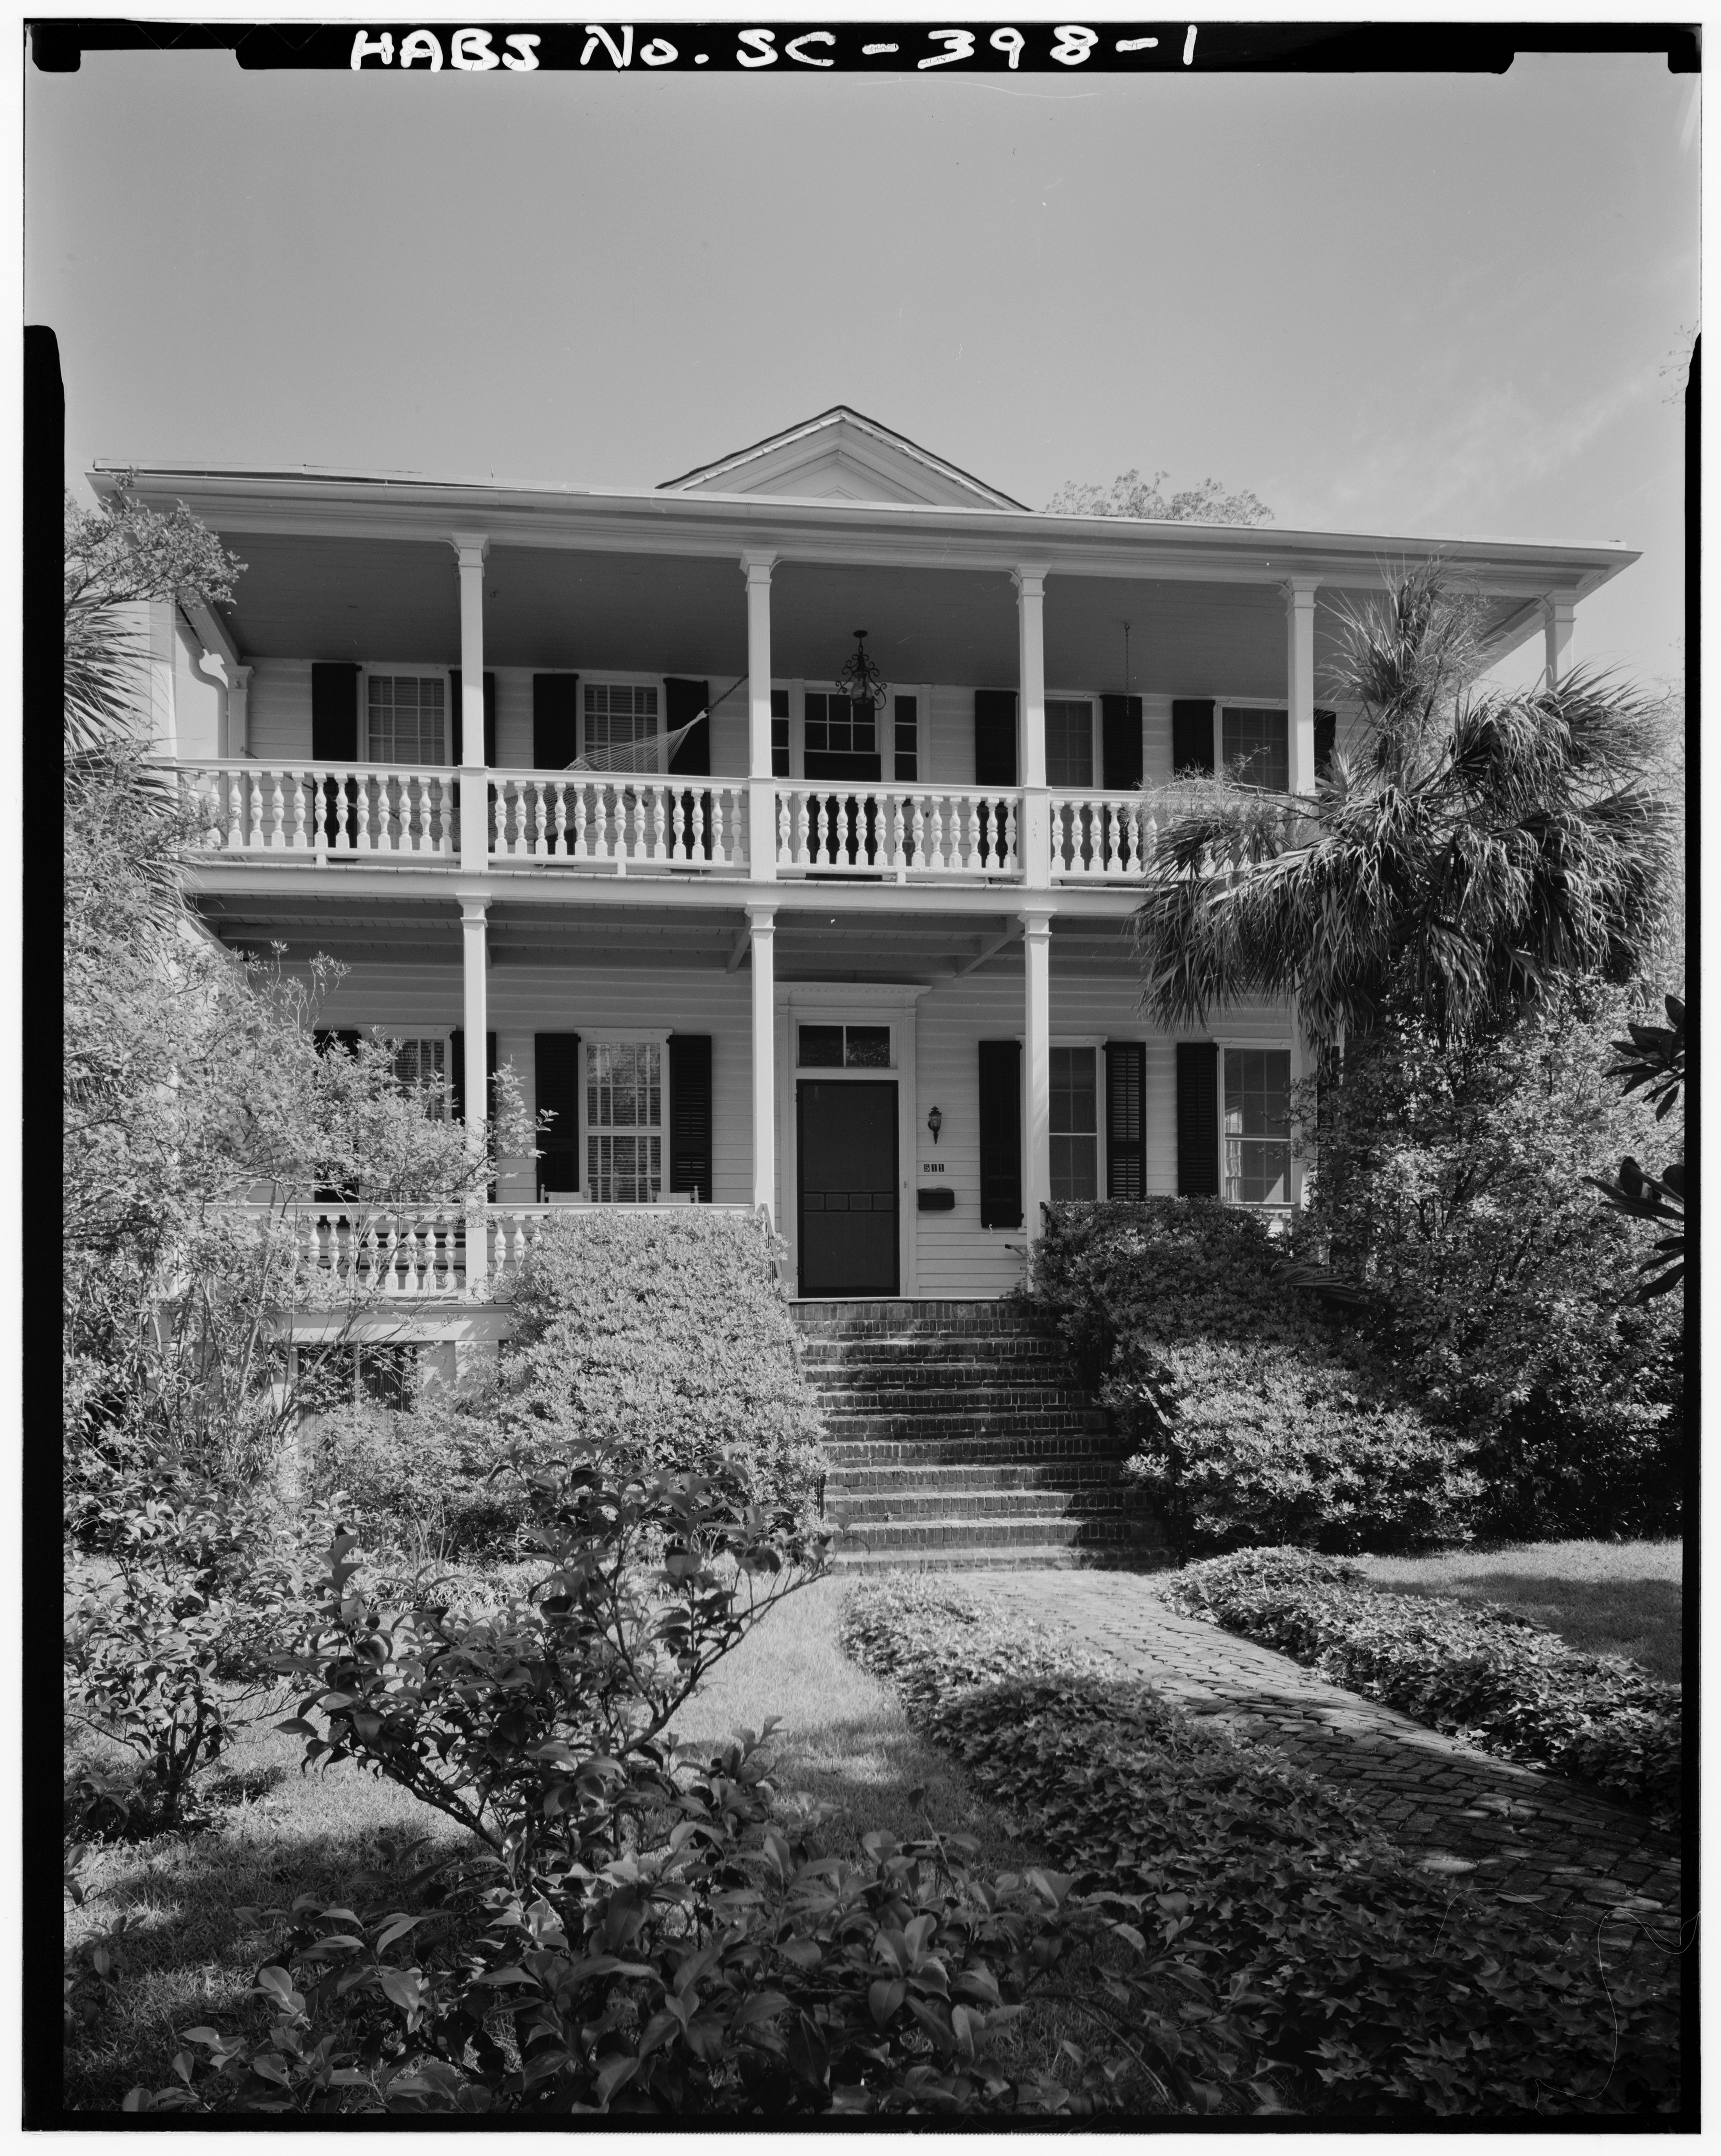 Home of Robert Smalls in Beaufort, SC, that had belonged to his former master.Smalls' purchase of the house was contested in court and was decided in his favor by the U.S. Supreme Court.